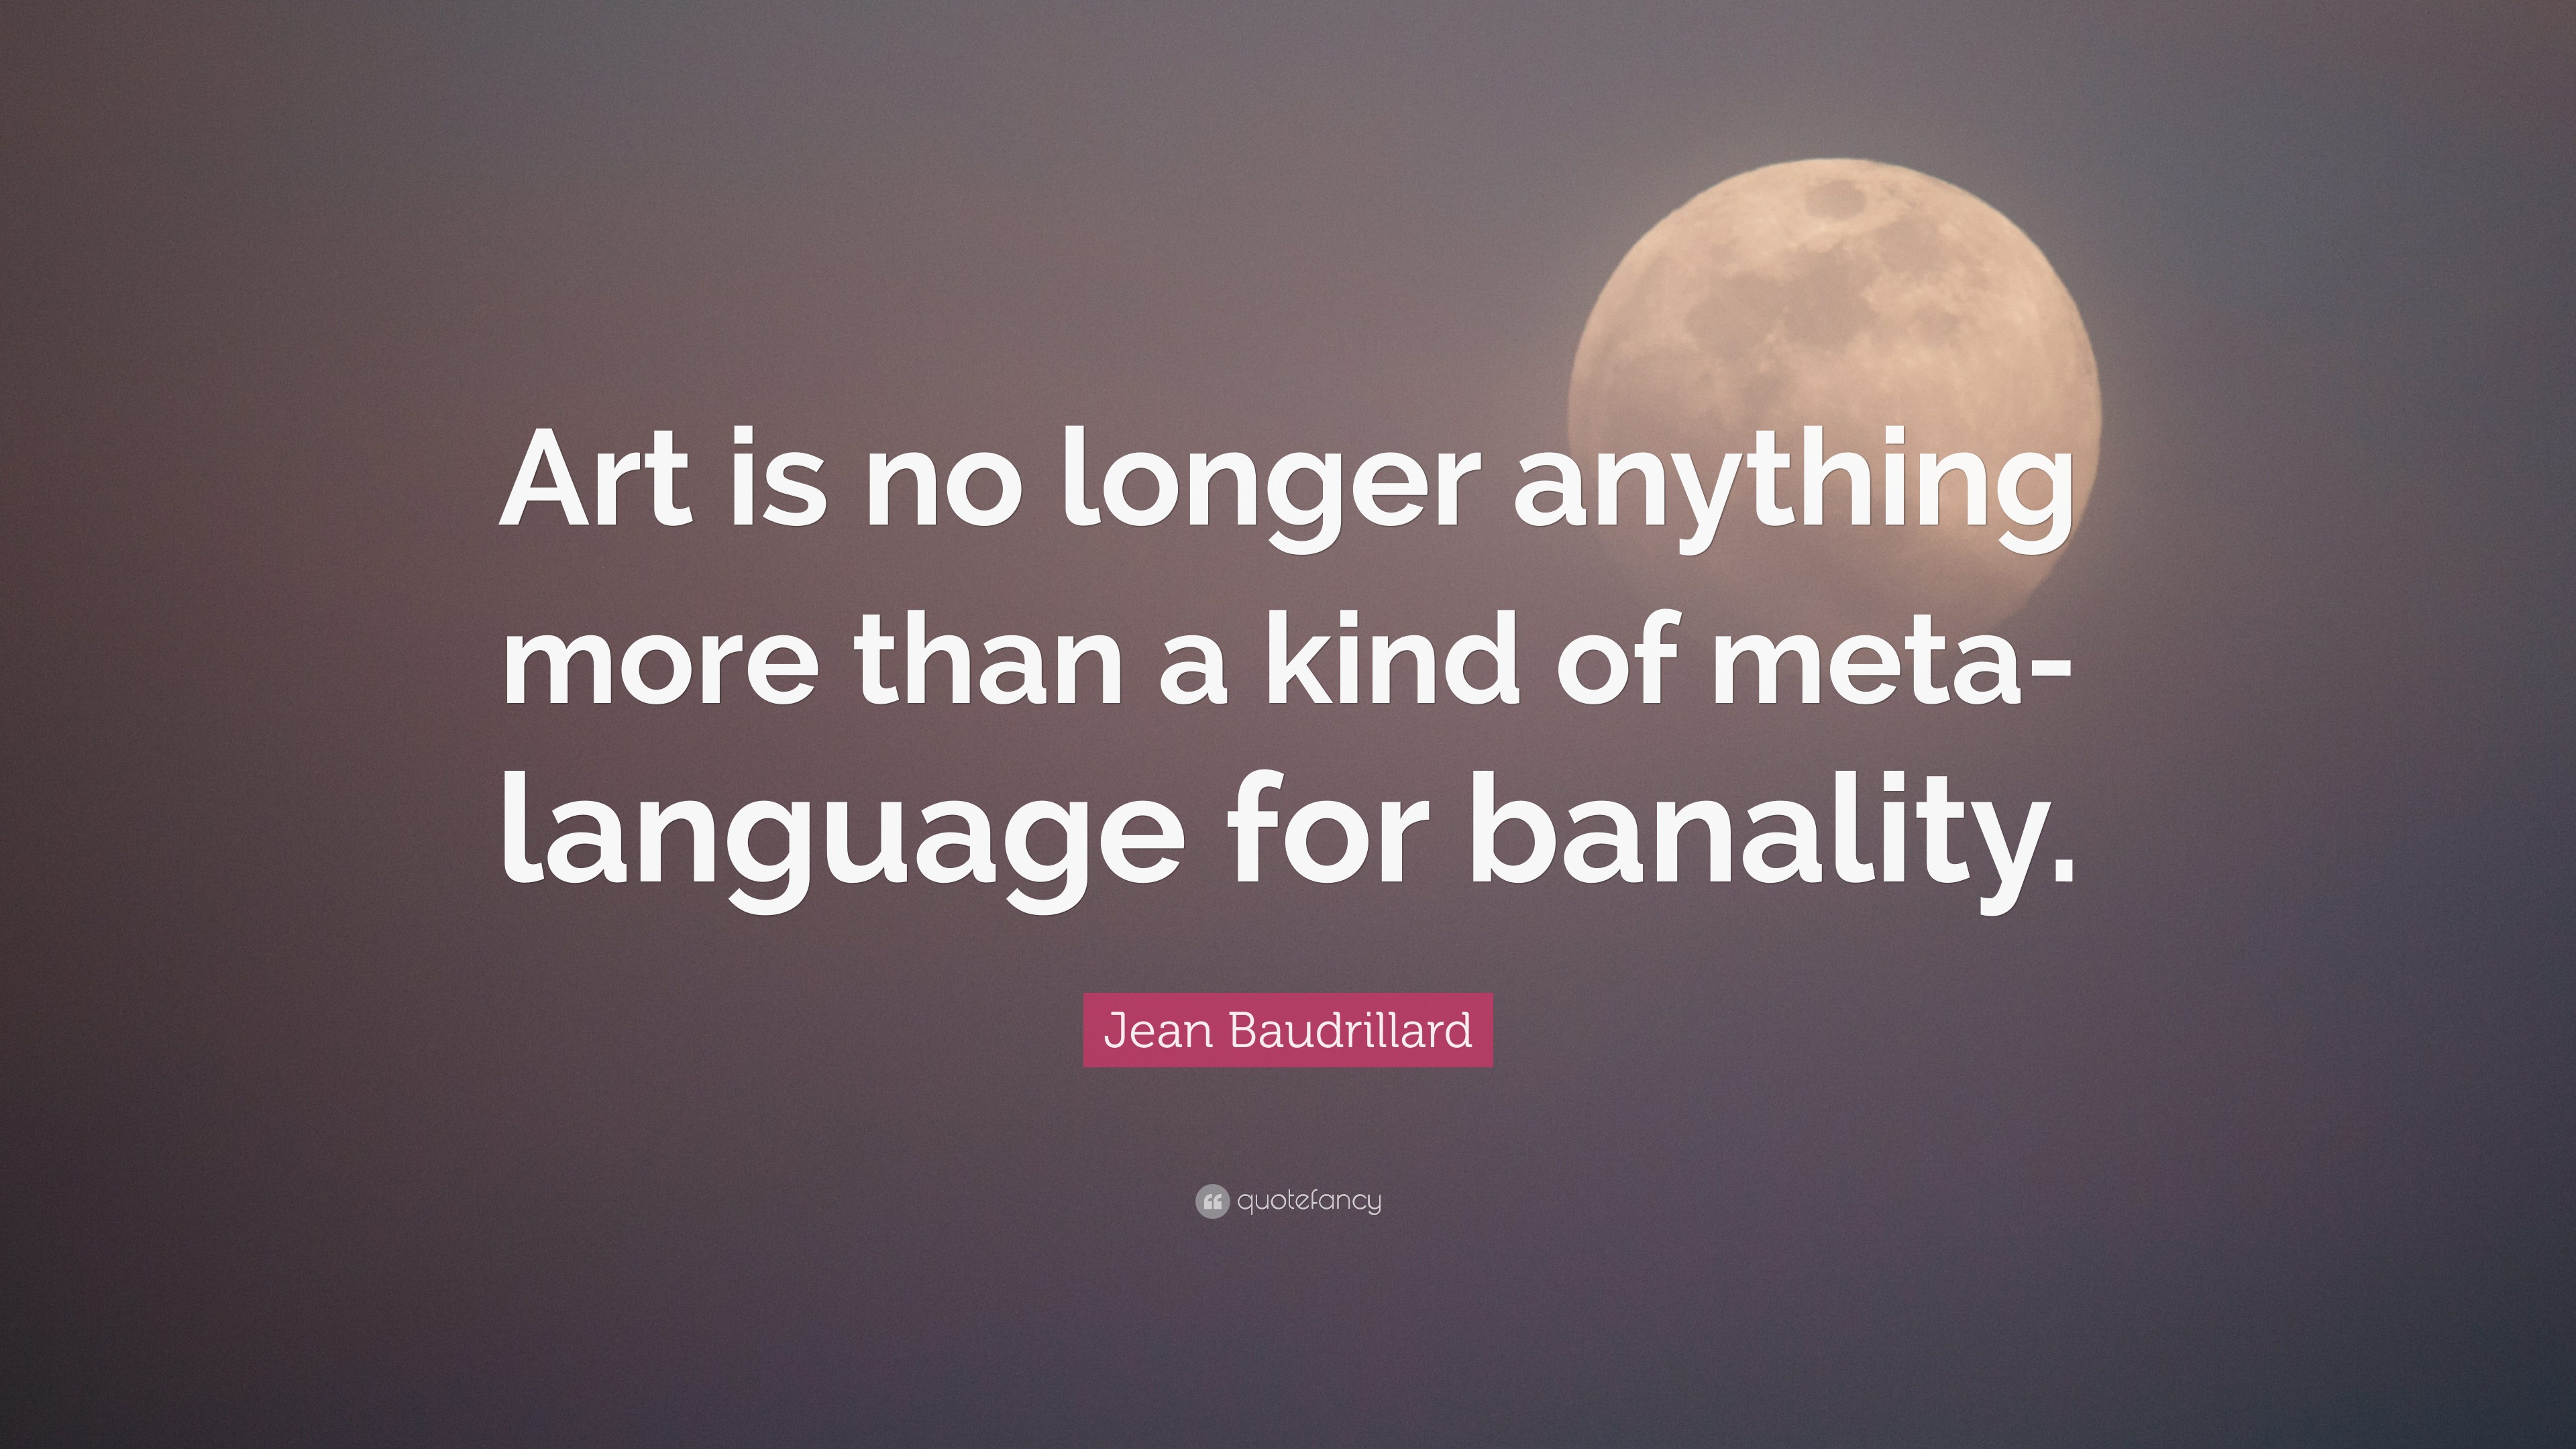 Jean Baudrillard Quote Art Is No Longer Anything More Than A Images, Photos, Reviews